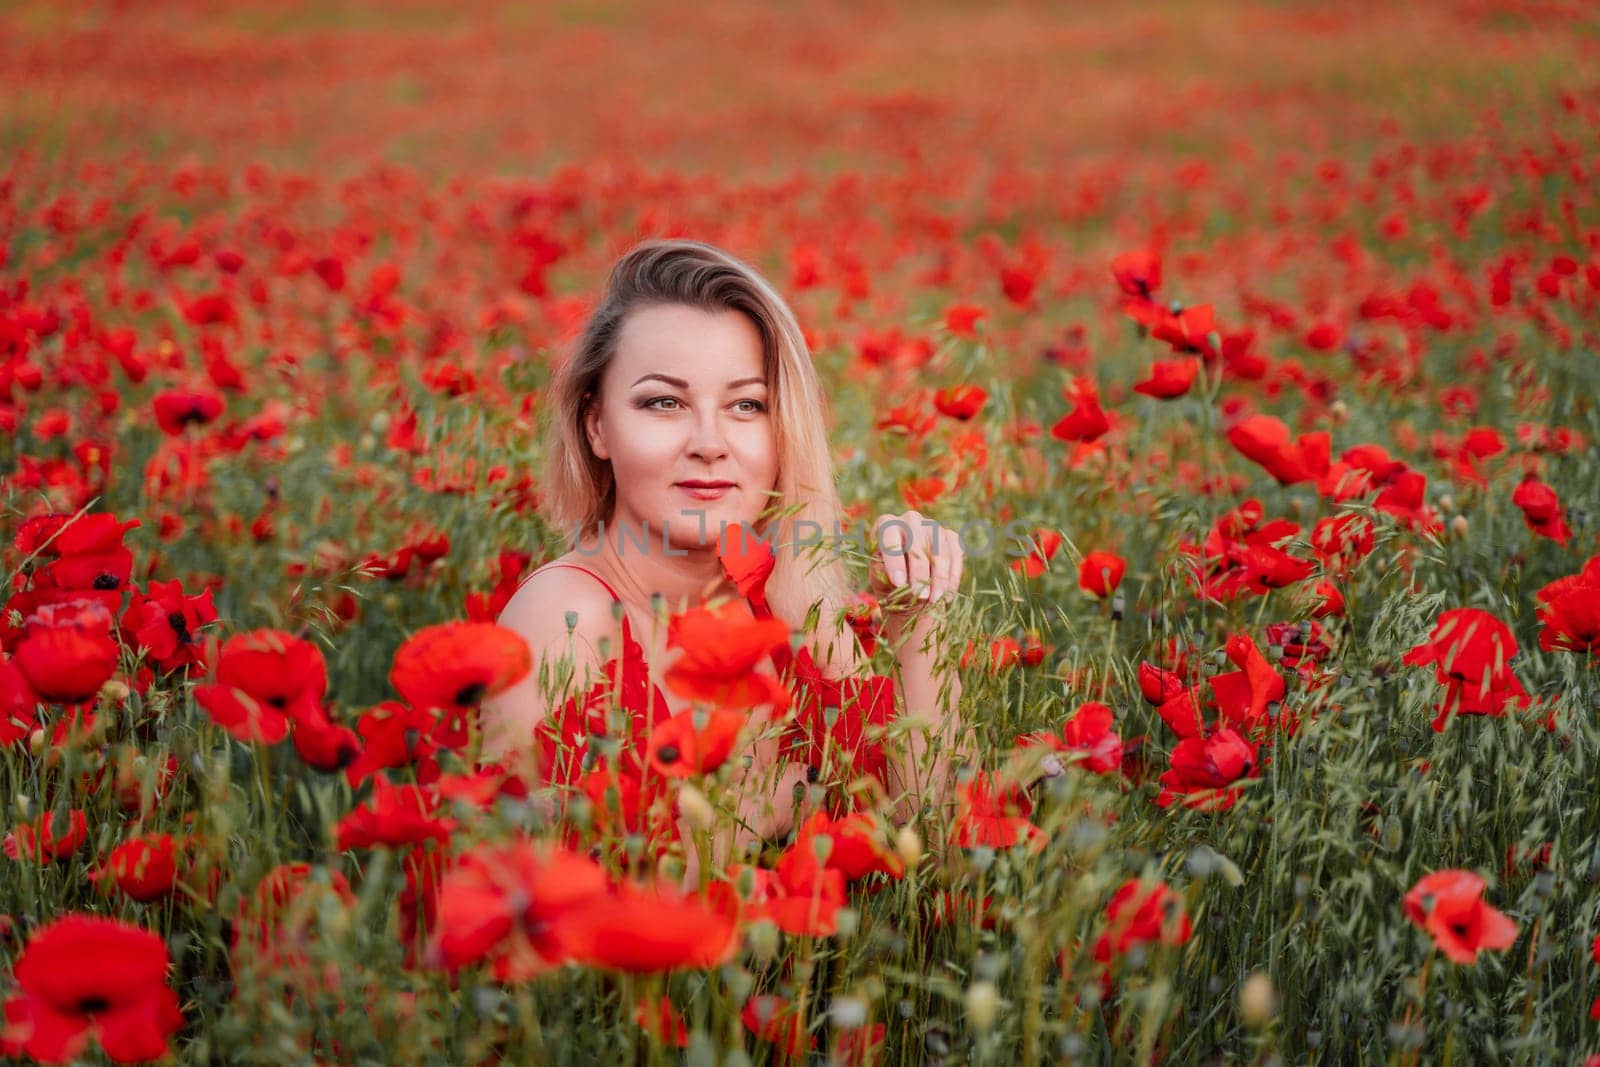 Happy woman in a red dress in a beautiful large poppy field. Blond sits in a red dress, posing on a large field of red poppies.